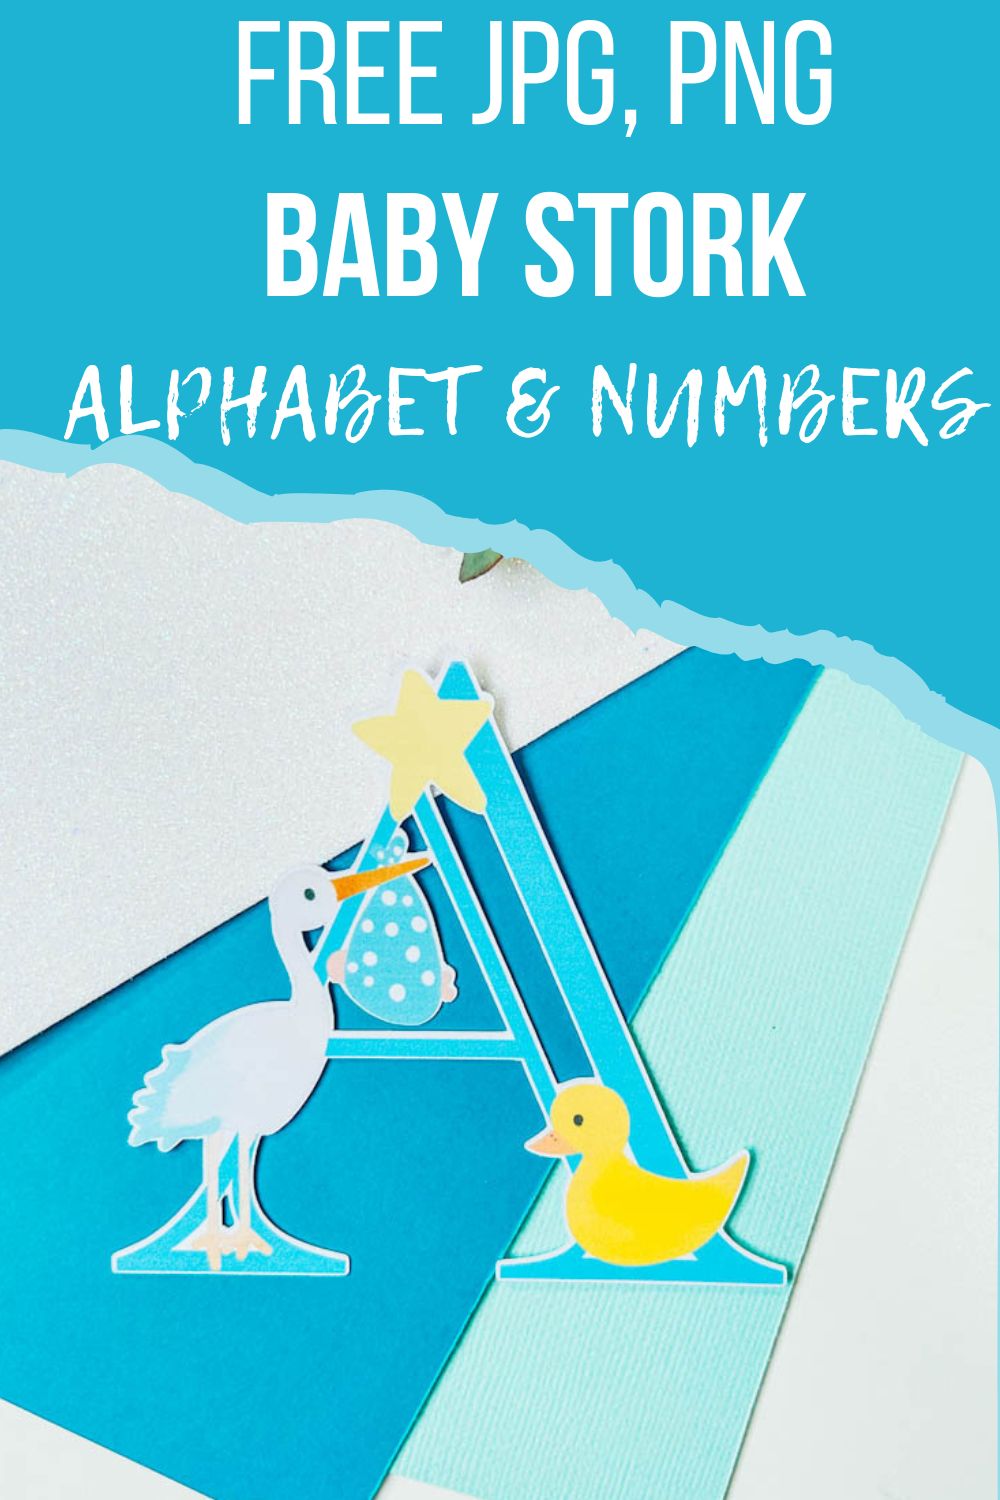 Free JPG PNG Printable Blue Baby Stork Alphabet for Cricut, Silhouette and Sublimation